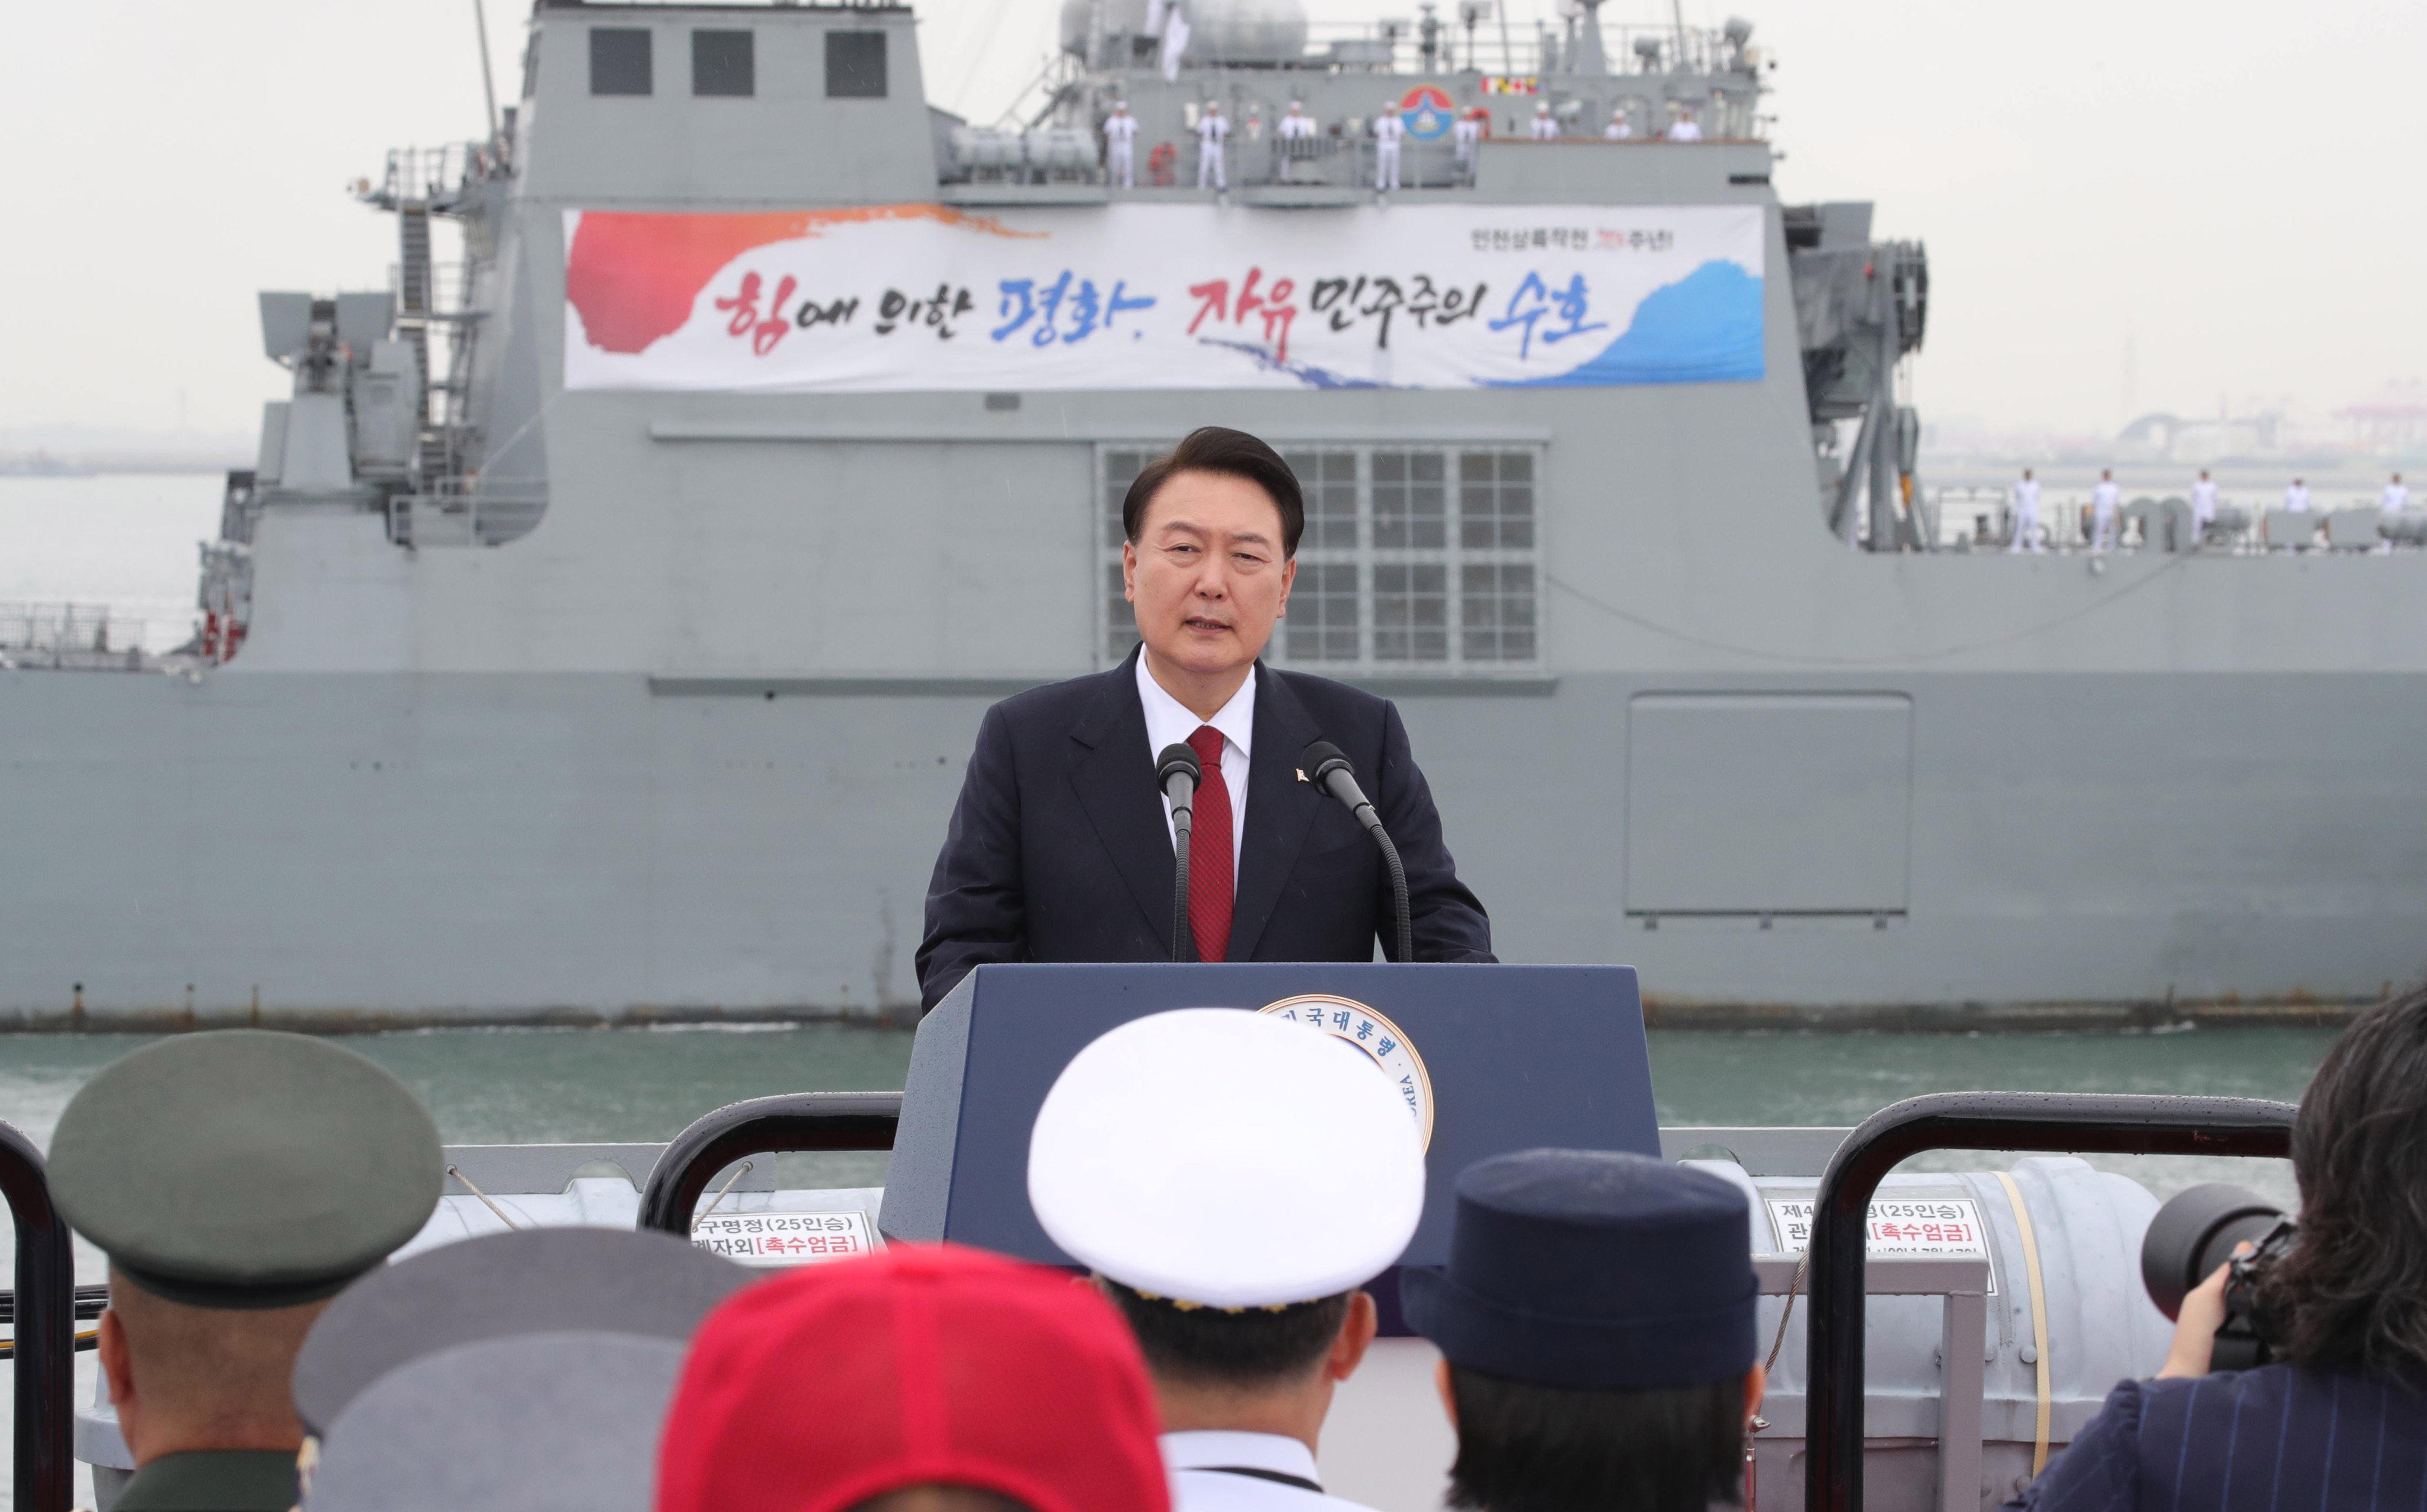 South Korean President Yoon Suk-yeol at a ceremony on September 15 to mark the 73rd anniversary of a historic amphibious landing operation in the Korean War. Photo: EPA-EFE/YONHAP